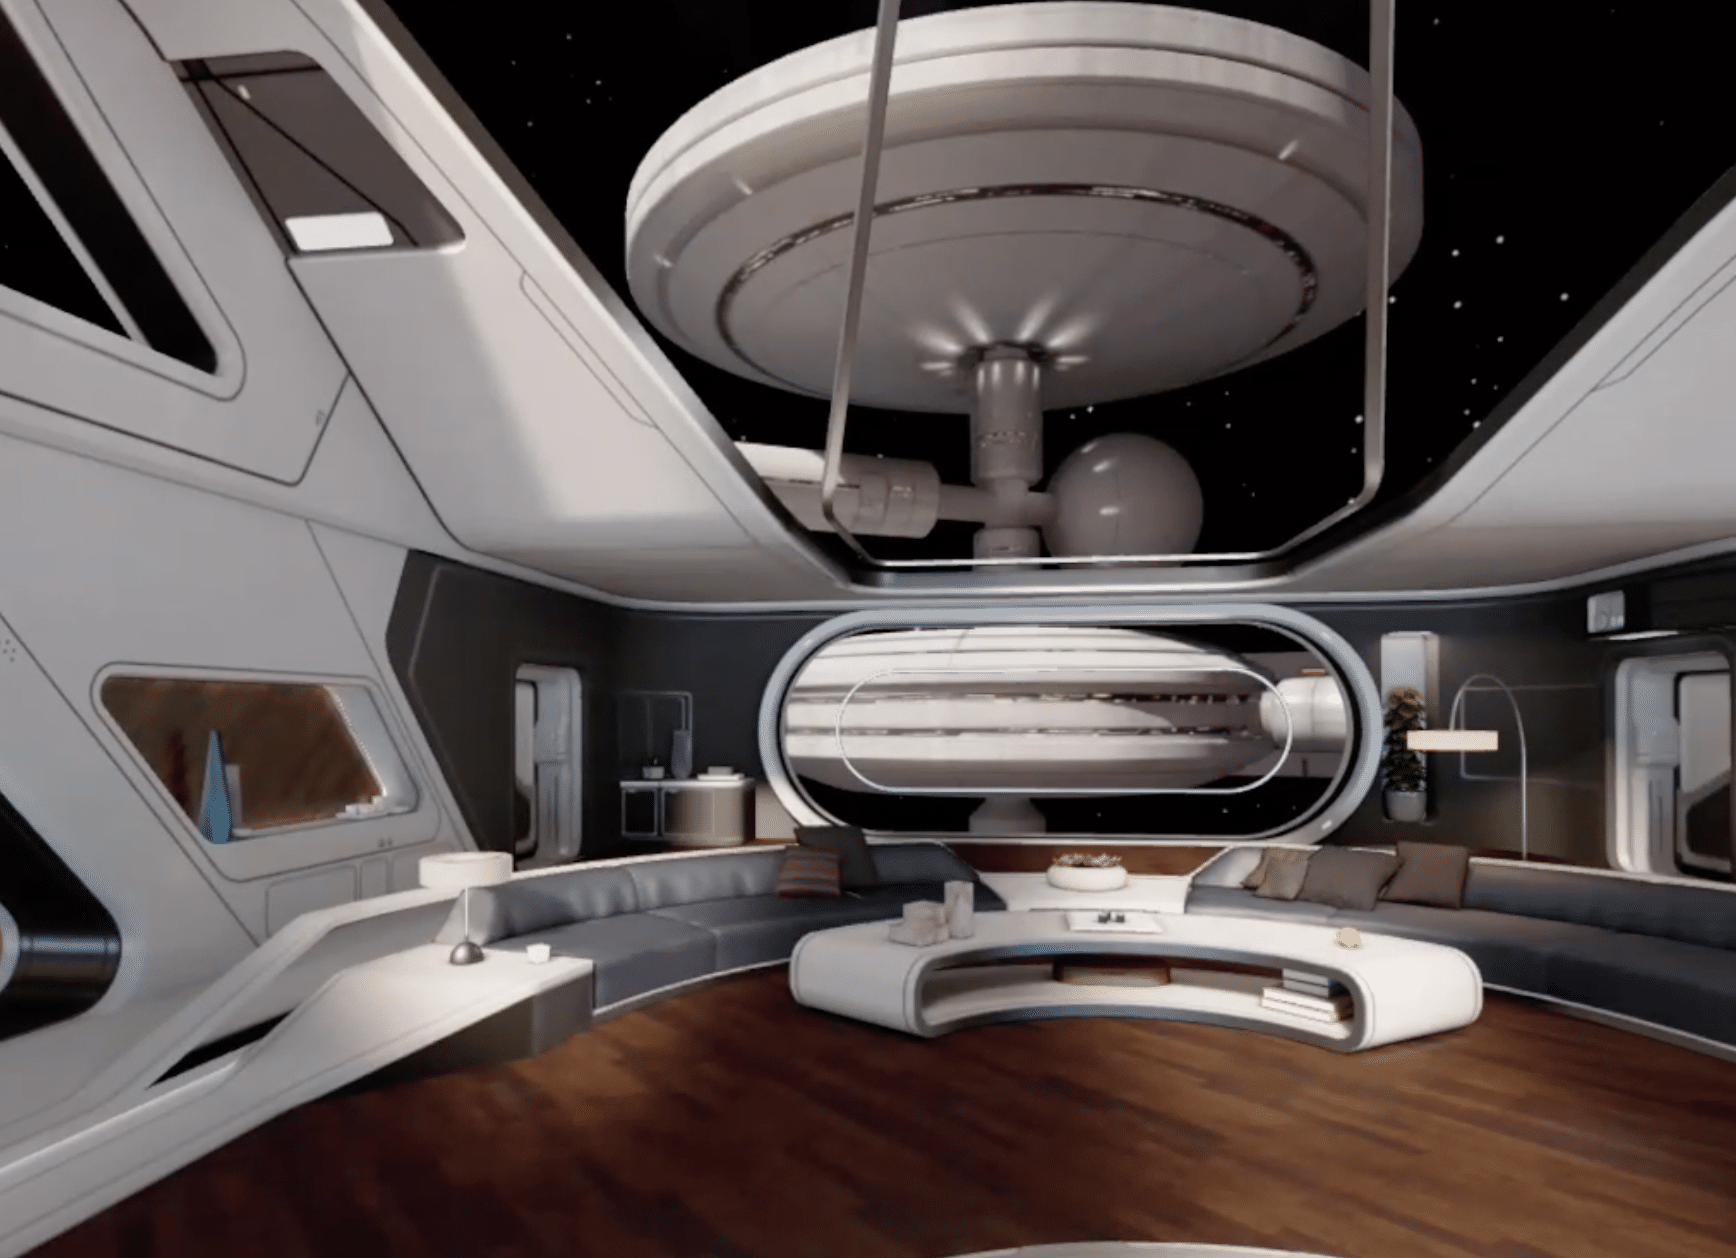 Oculus Quest Home Space Station